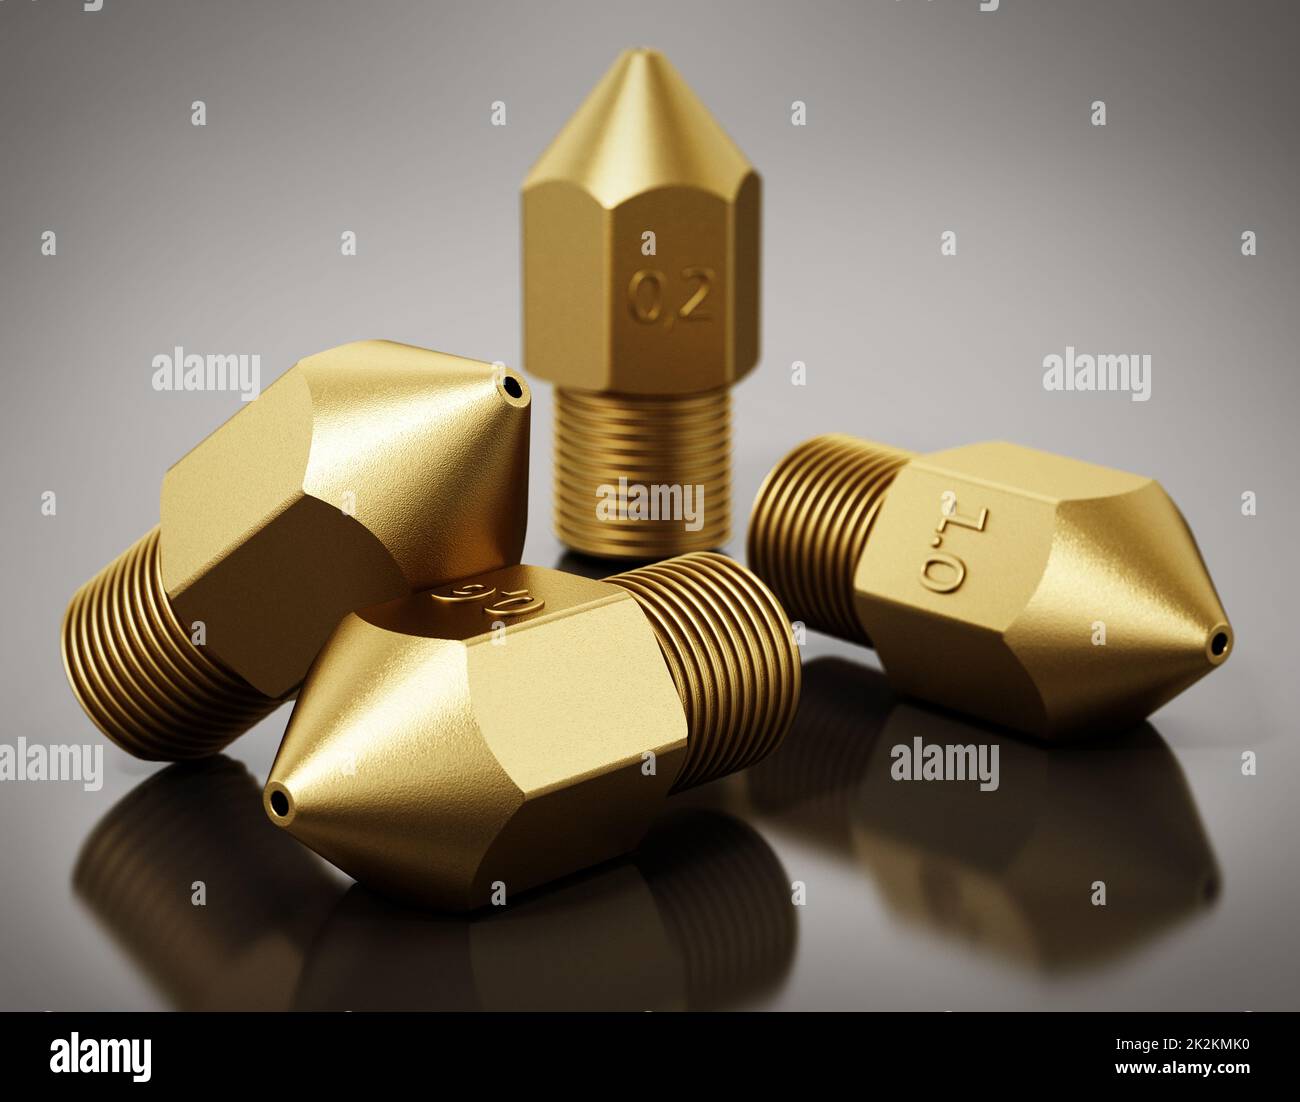 Brass 3D printer nozzles isolated on gray background. 3D illustration Stock Photo